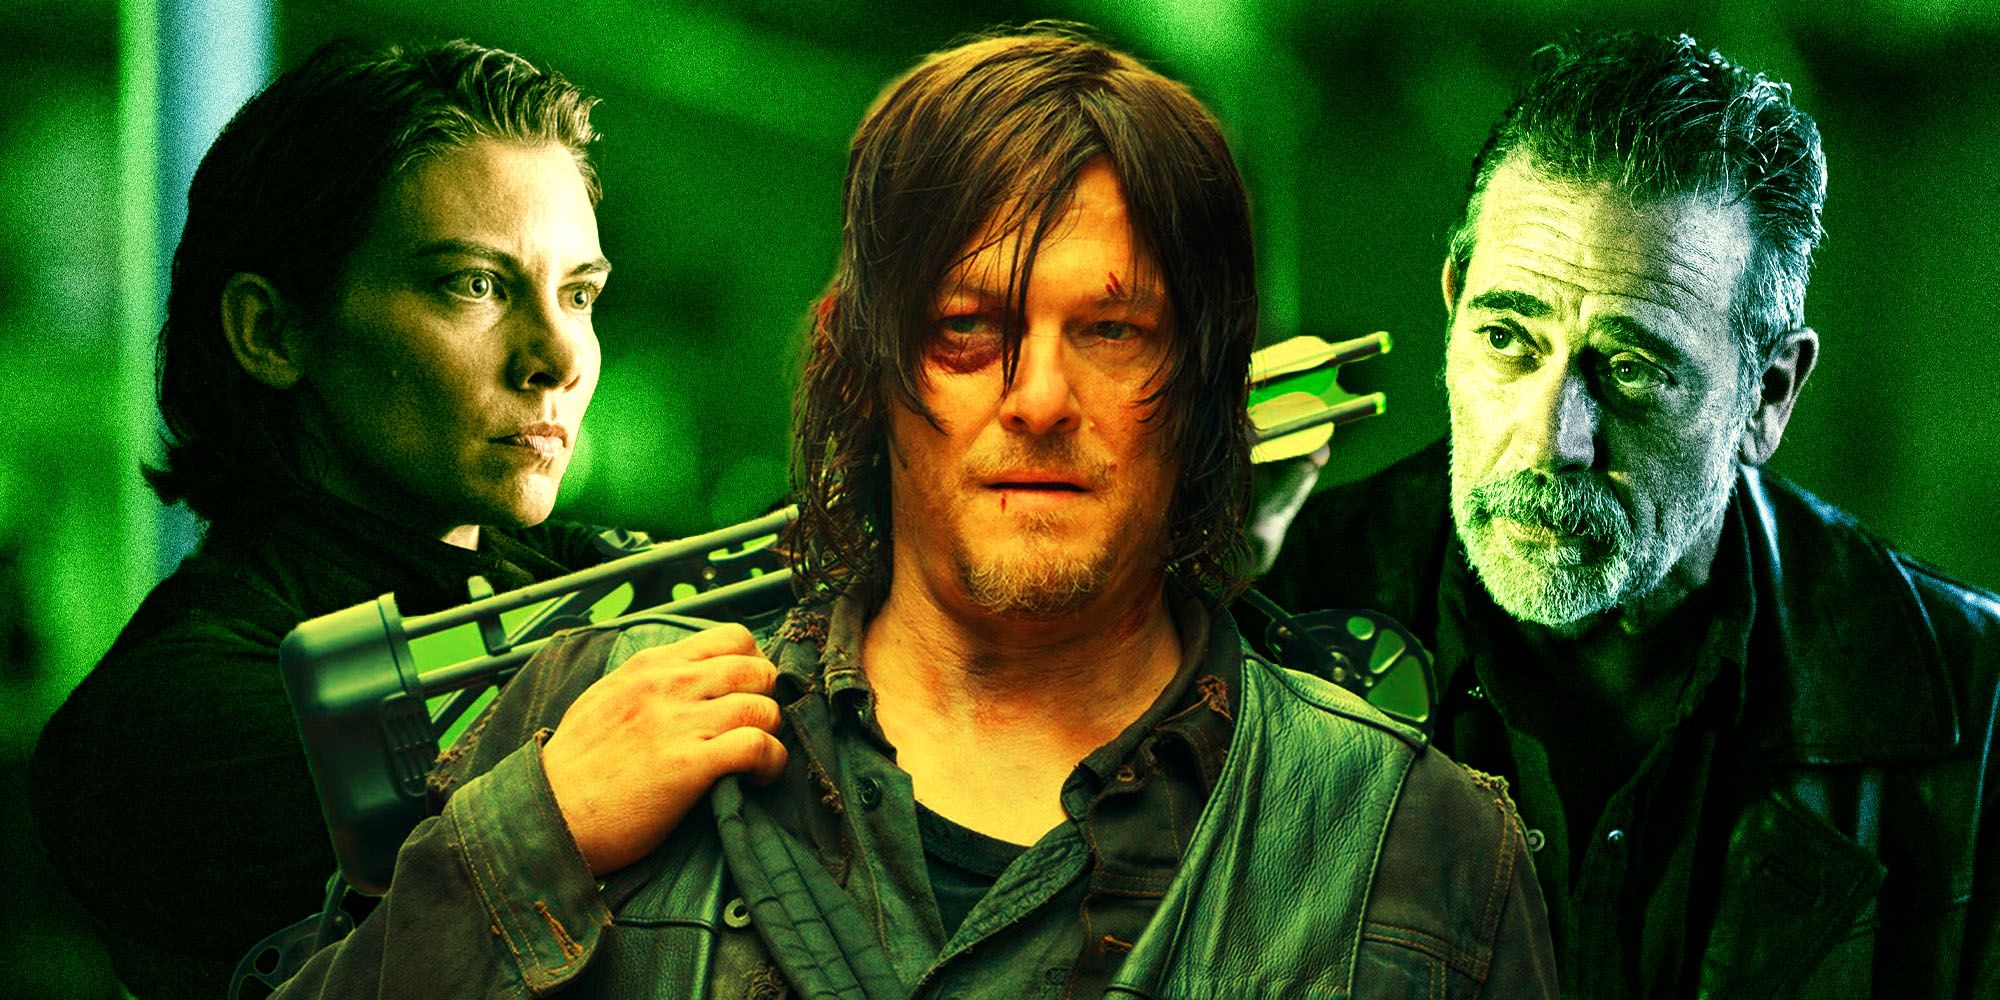 Maggie, Daryl, and Negan from The Walking Dead franchise